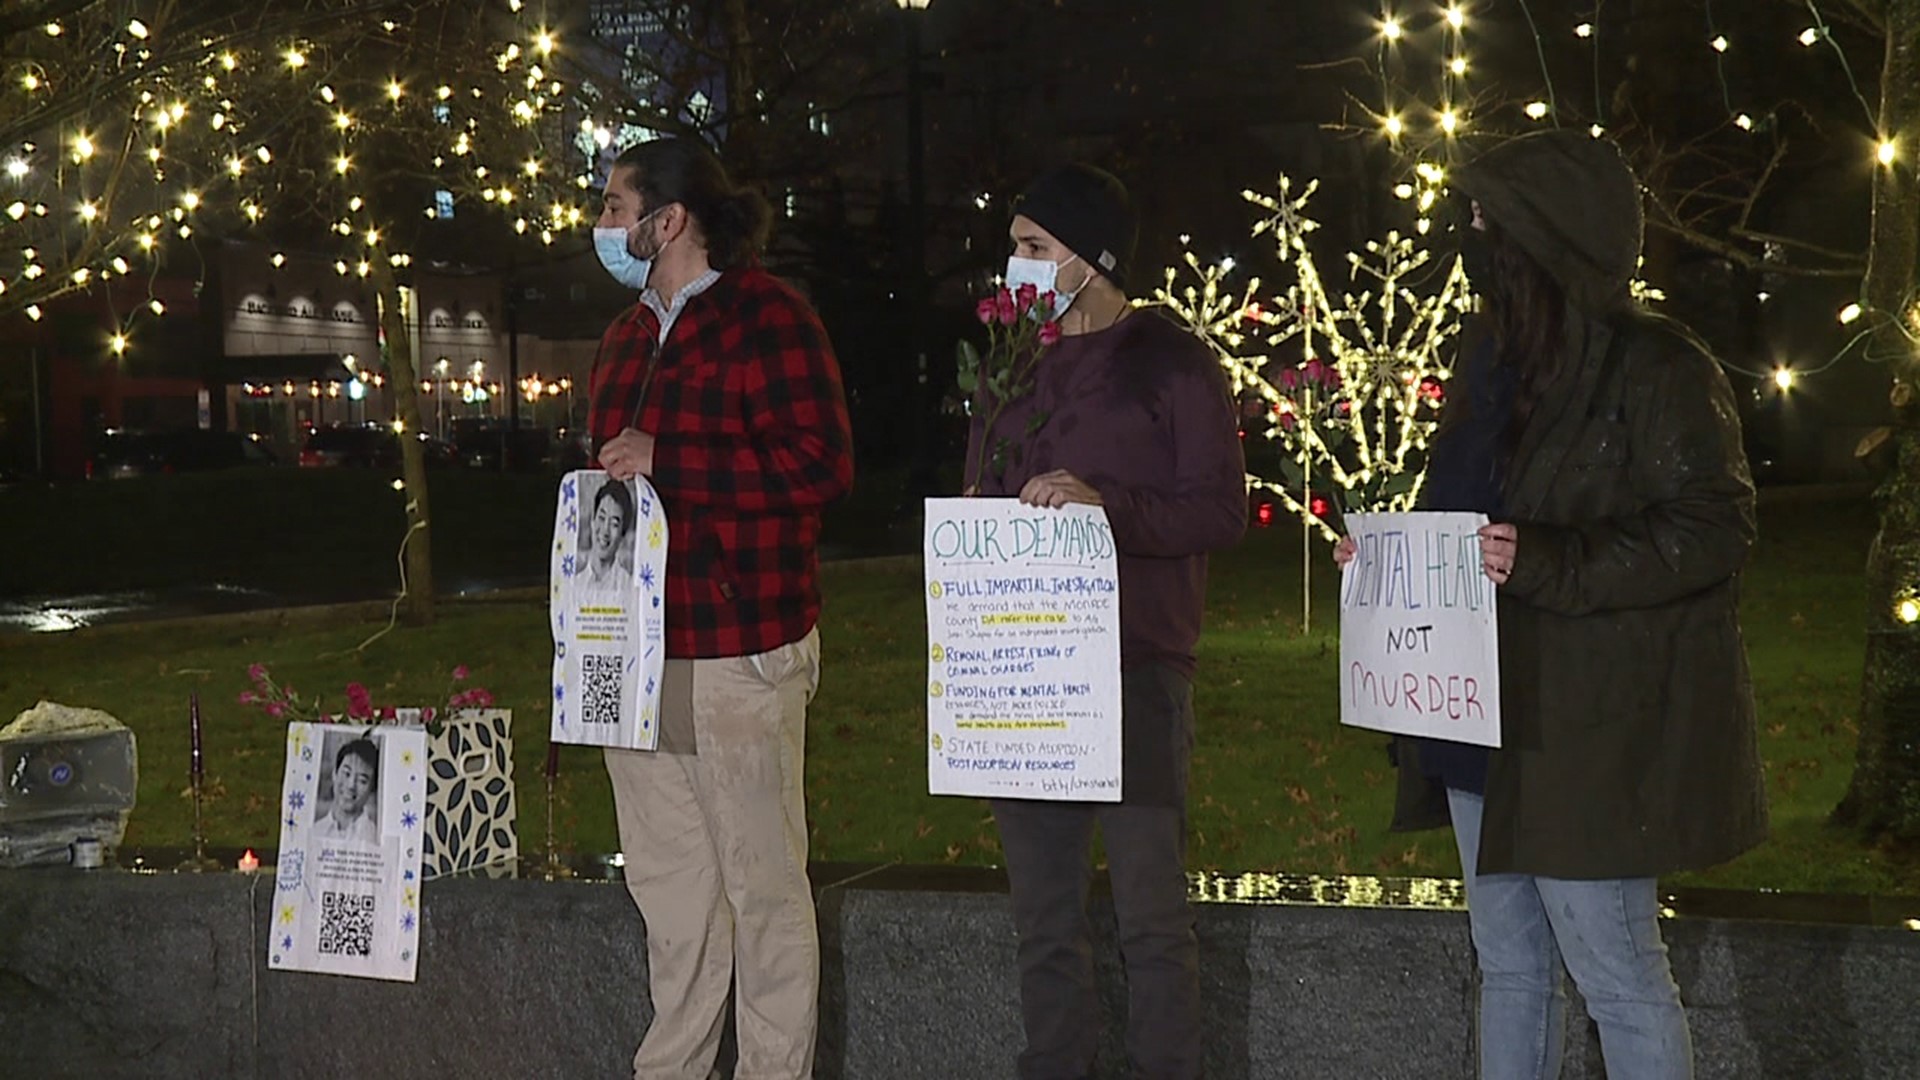 The vigil was held at Courthouse Square in downtown Scranton Thursday night.